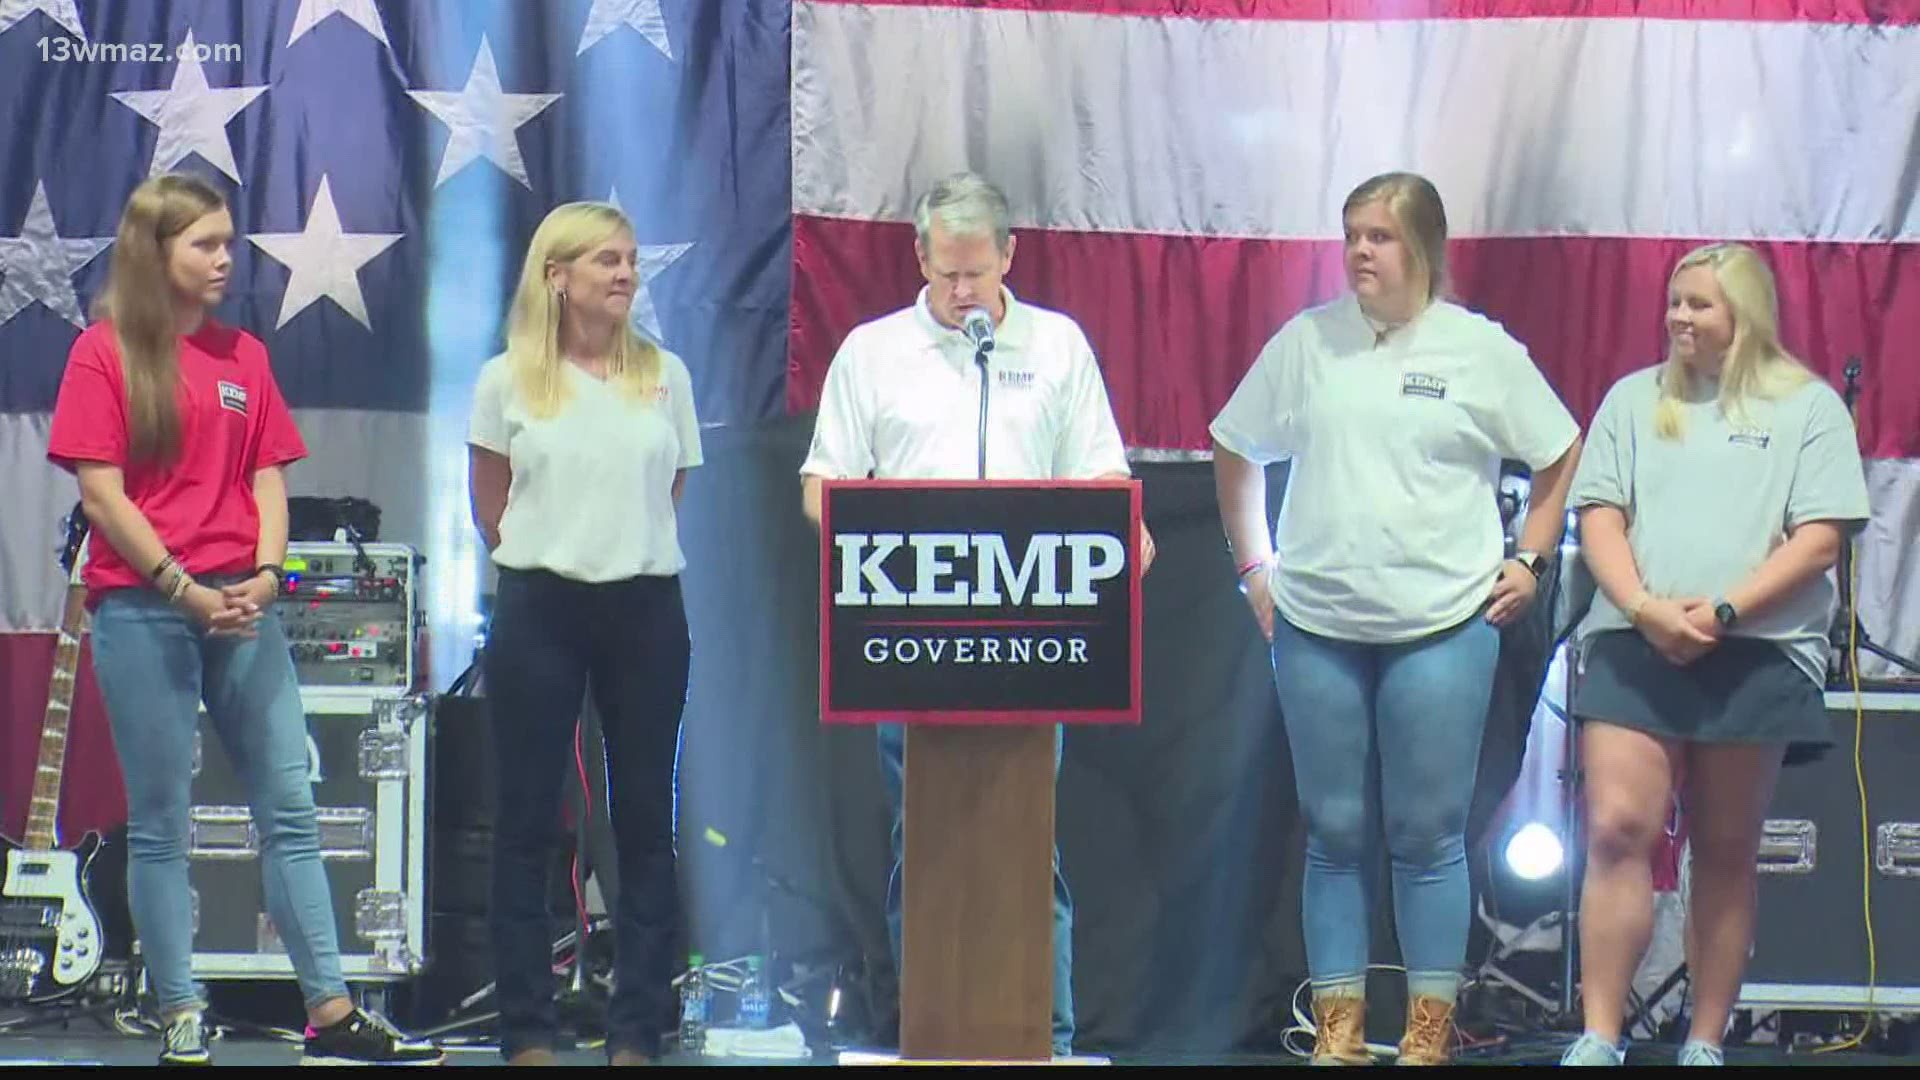 Kemp spoke to his supporters on Saturday at the fairgrounds.